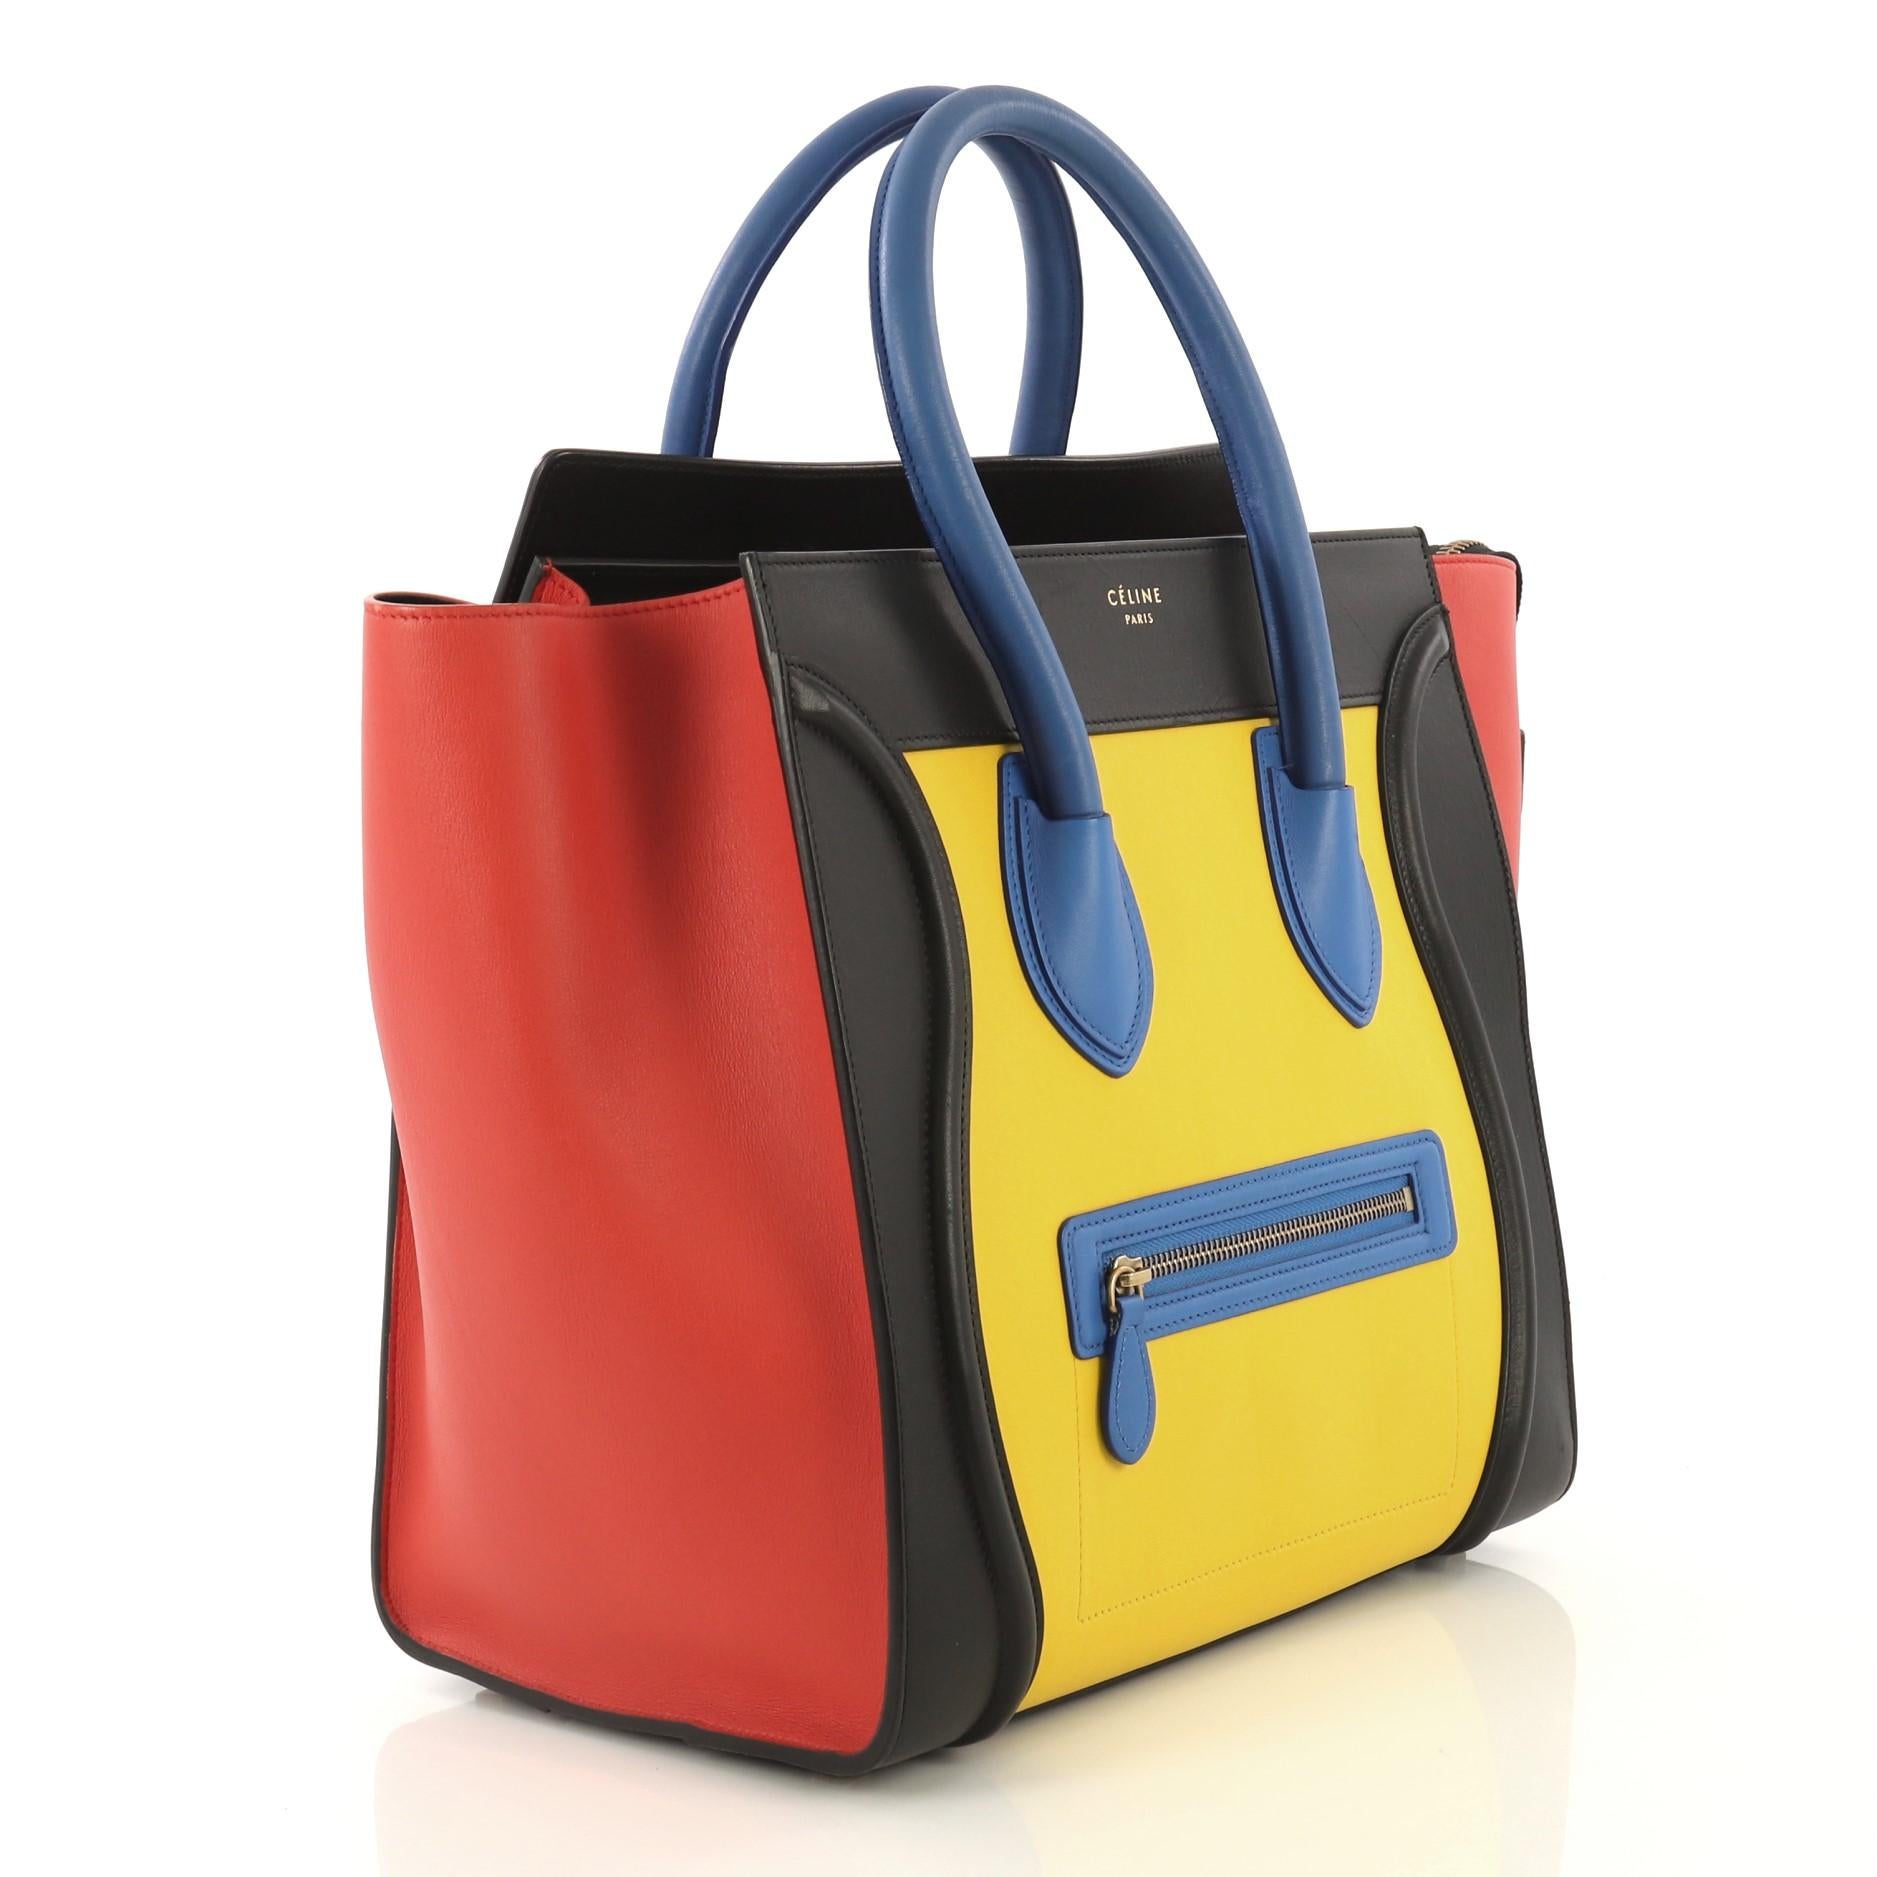 This Celine Multicolor Luggage Handbag Leather Mini, crafted in multicolor leather, features an exterior front zip pocket, dual rolled handles, protective base studs, and aged gold-tone hardware. Its top zip closure opens to a black leather interior